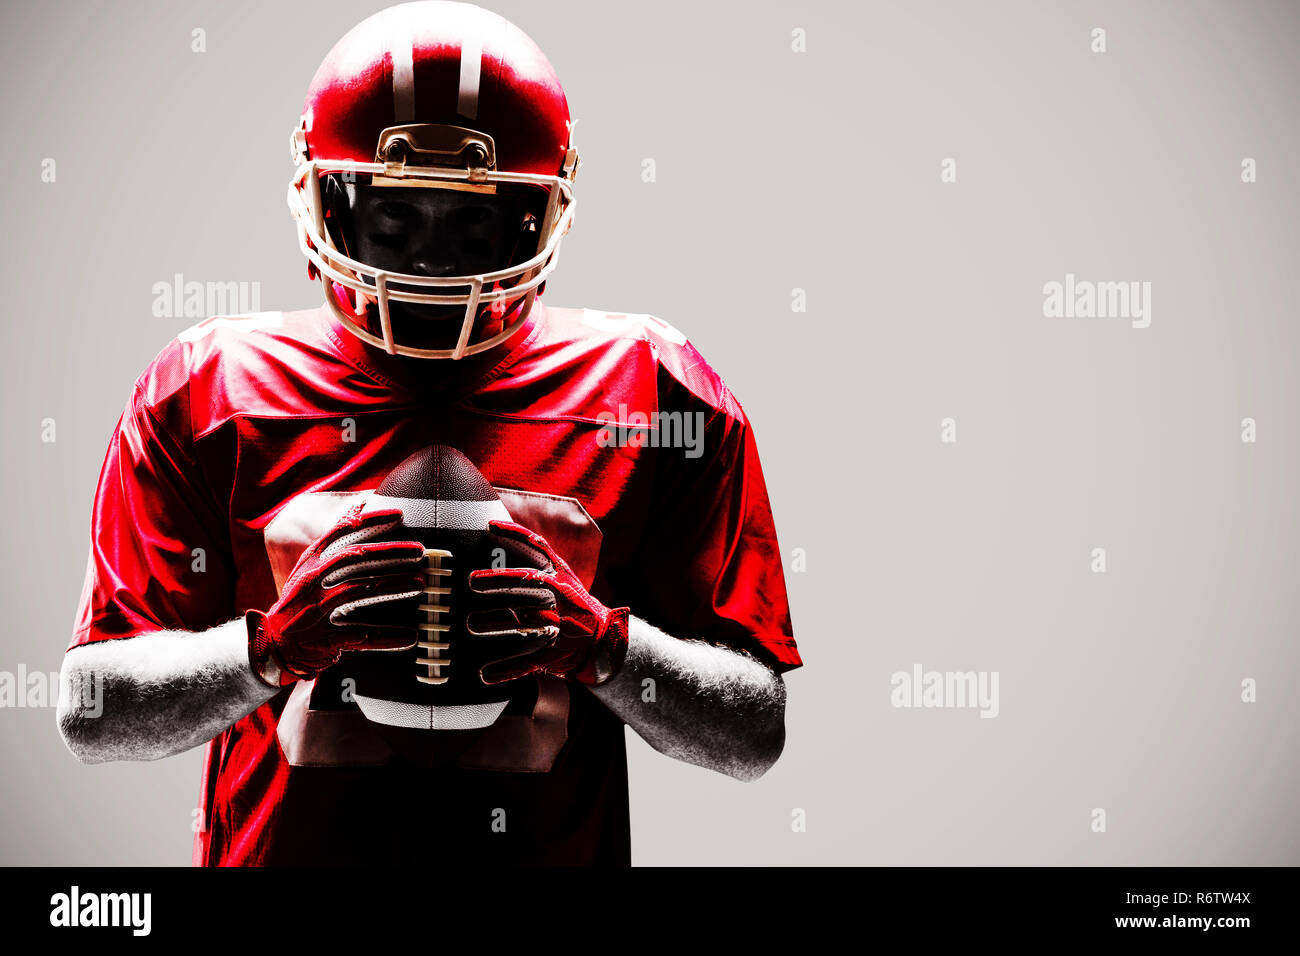 Young  American football player standing with rugby helmet and ball Stock Photo